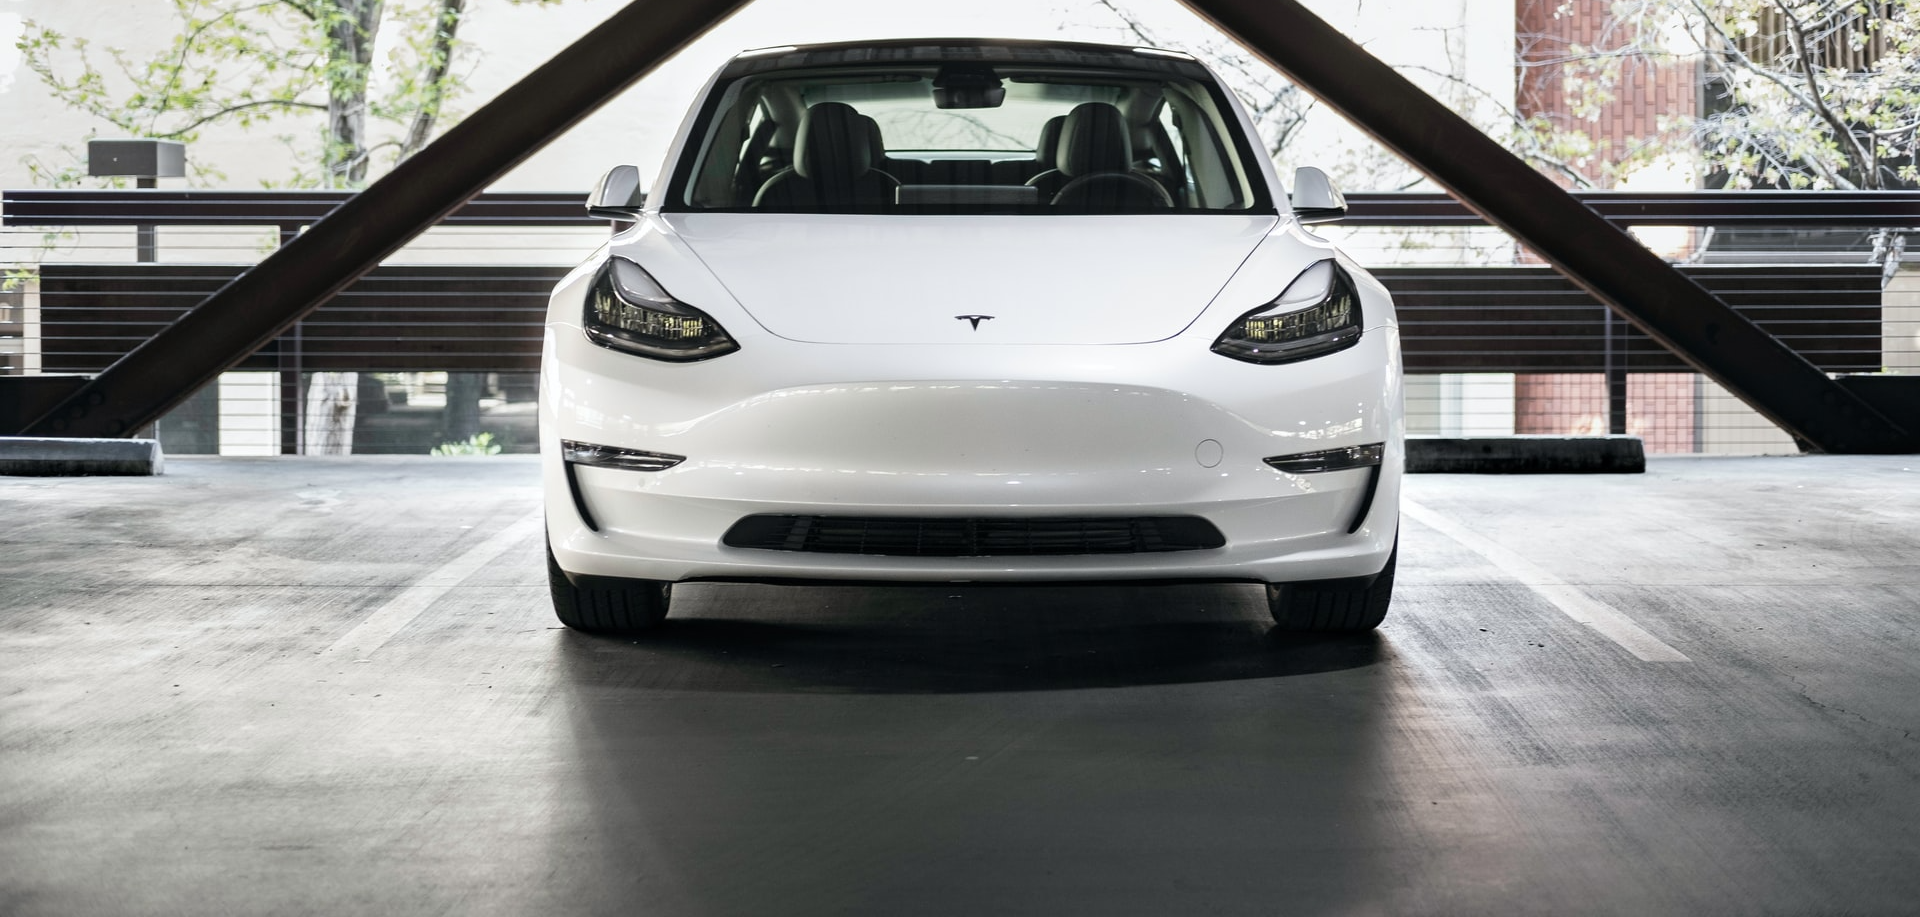 The highest scoring player of Chipotle's Race to Rewards Exchange video game will win a Tesla Model 3!